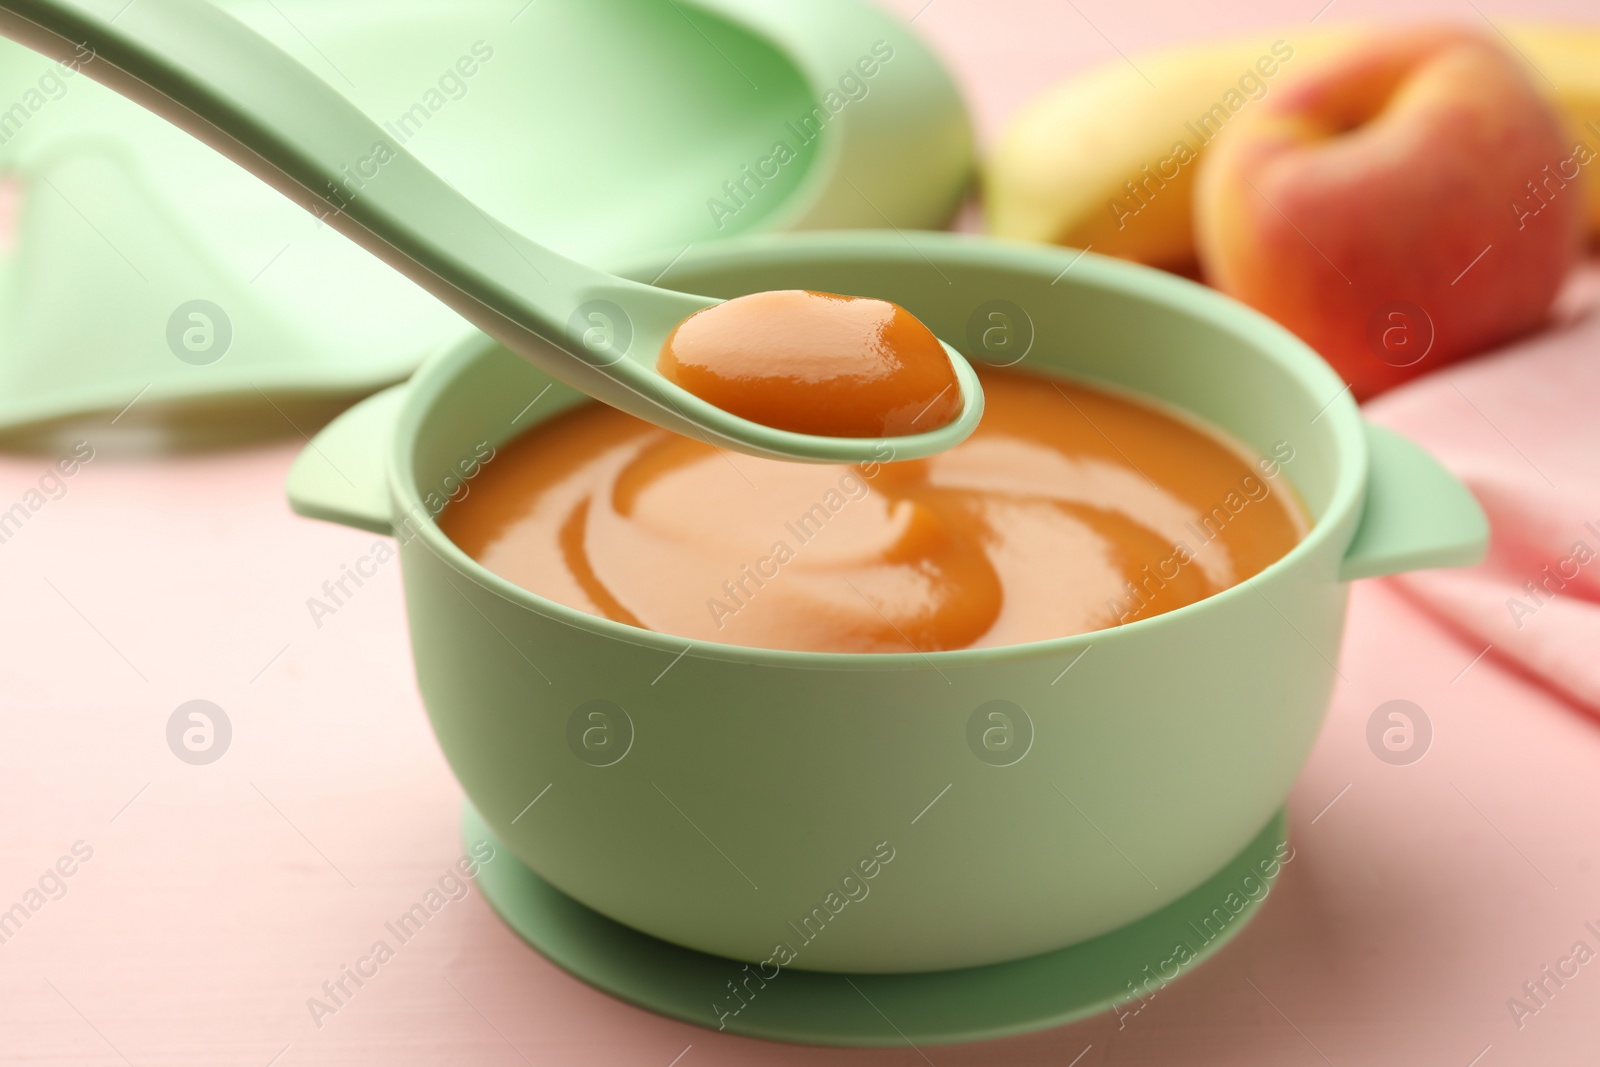 Photo of Spoon with tasty pureed baby food over bowl on pink wooden table, closeup